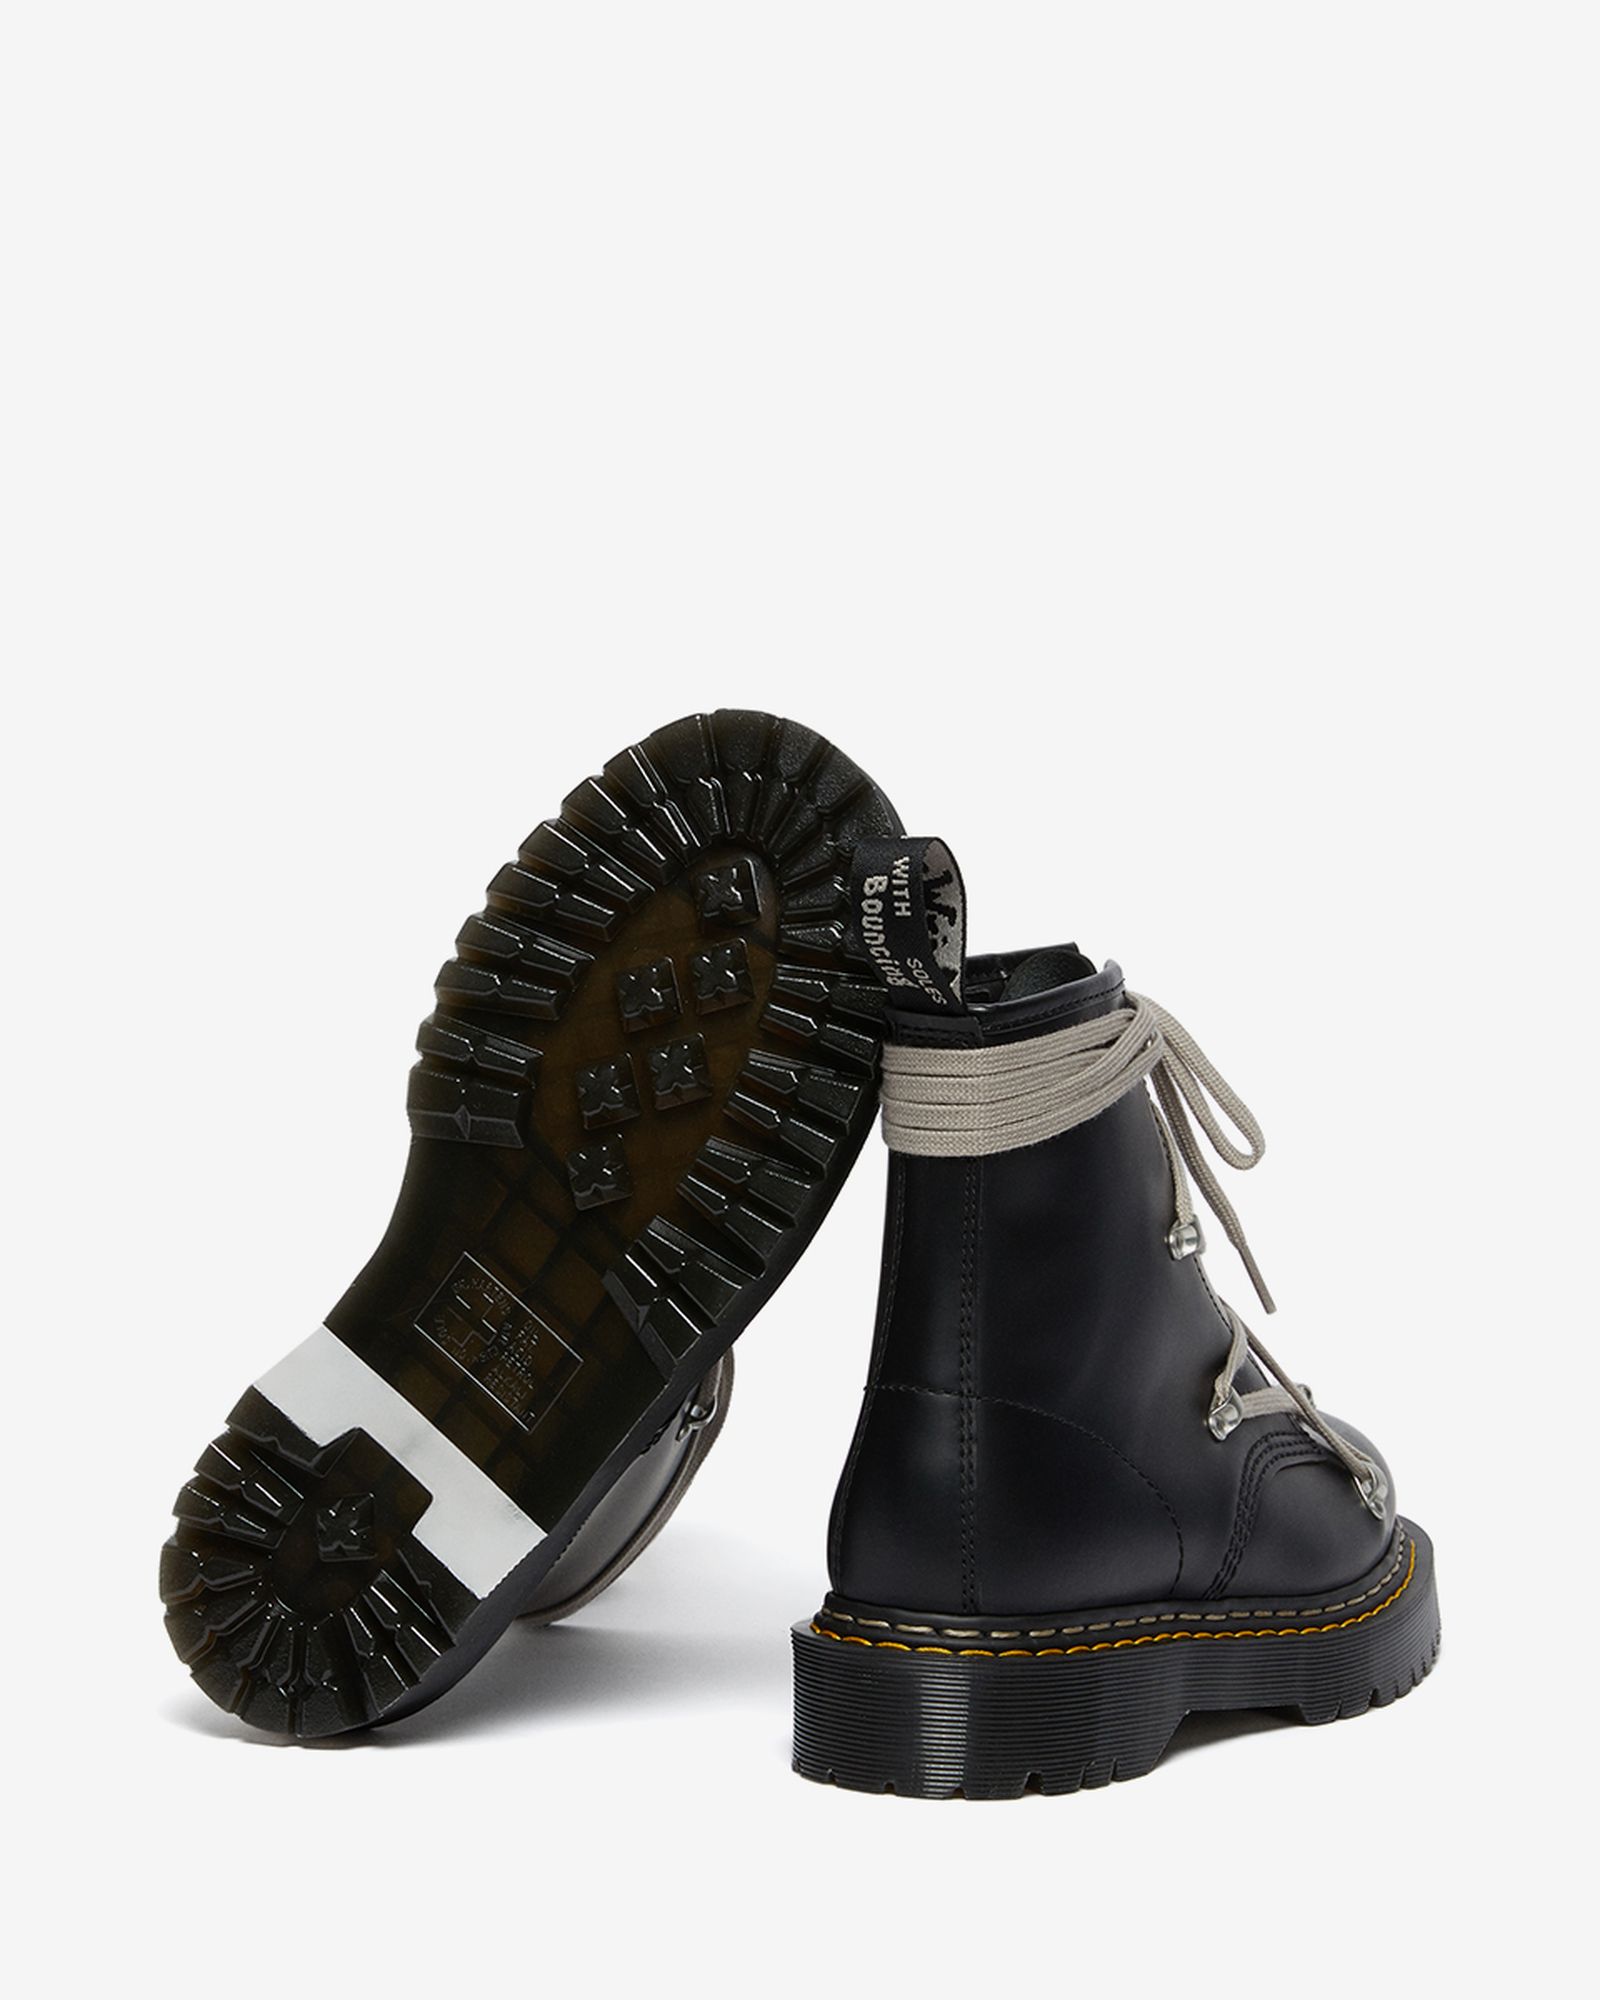 rick-owens-dr-martens-1460-bex-release-date-price-08